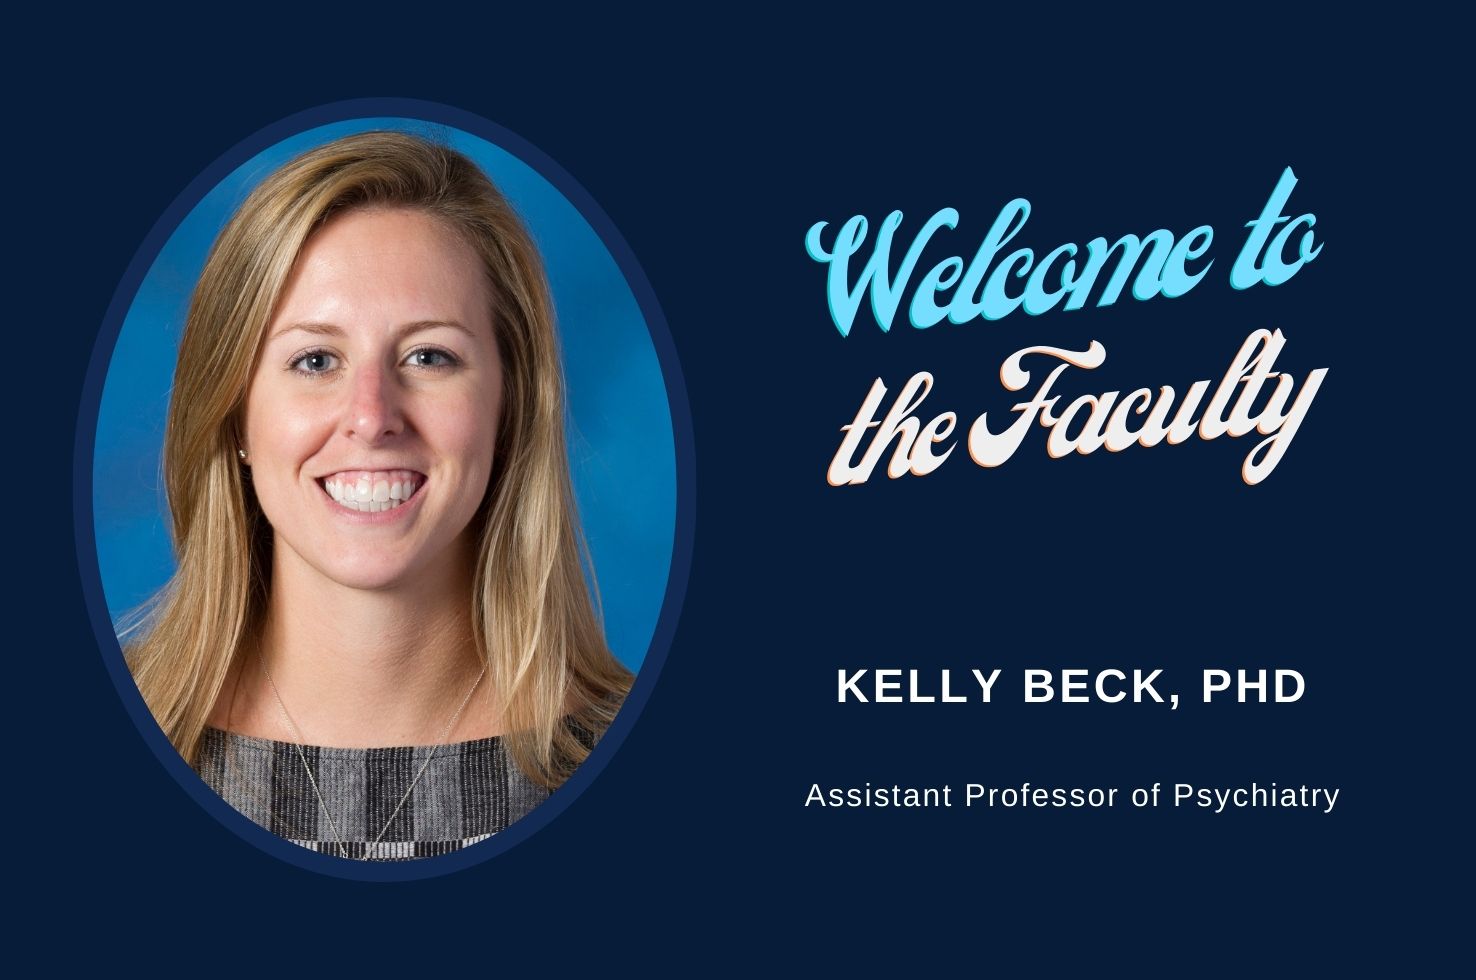 Department Welcomes Dr. Kelly Beck to the Faculty